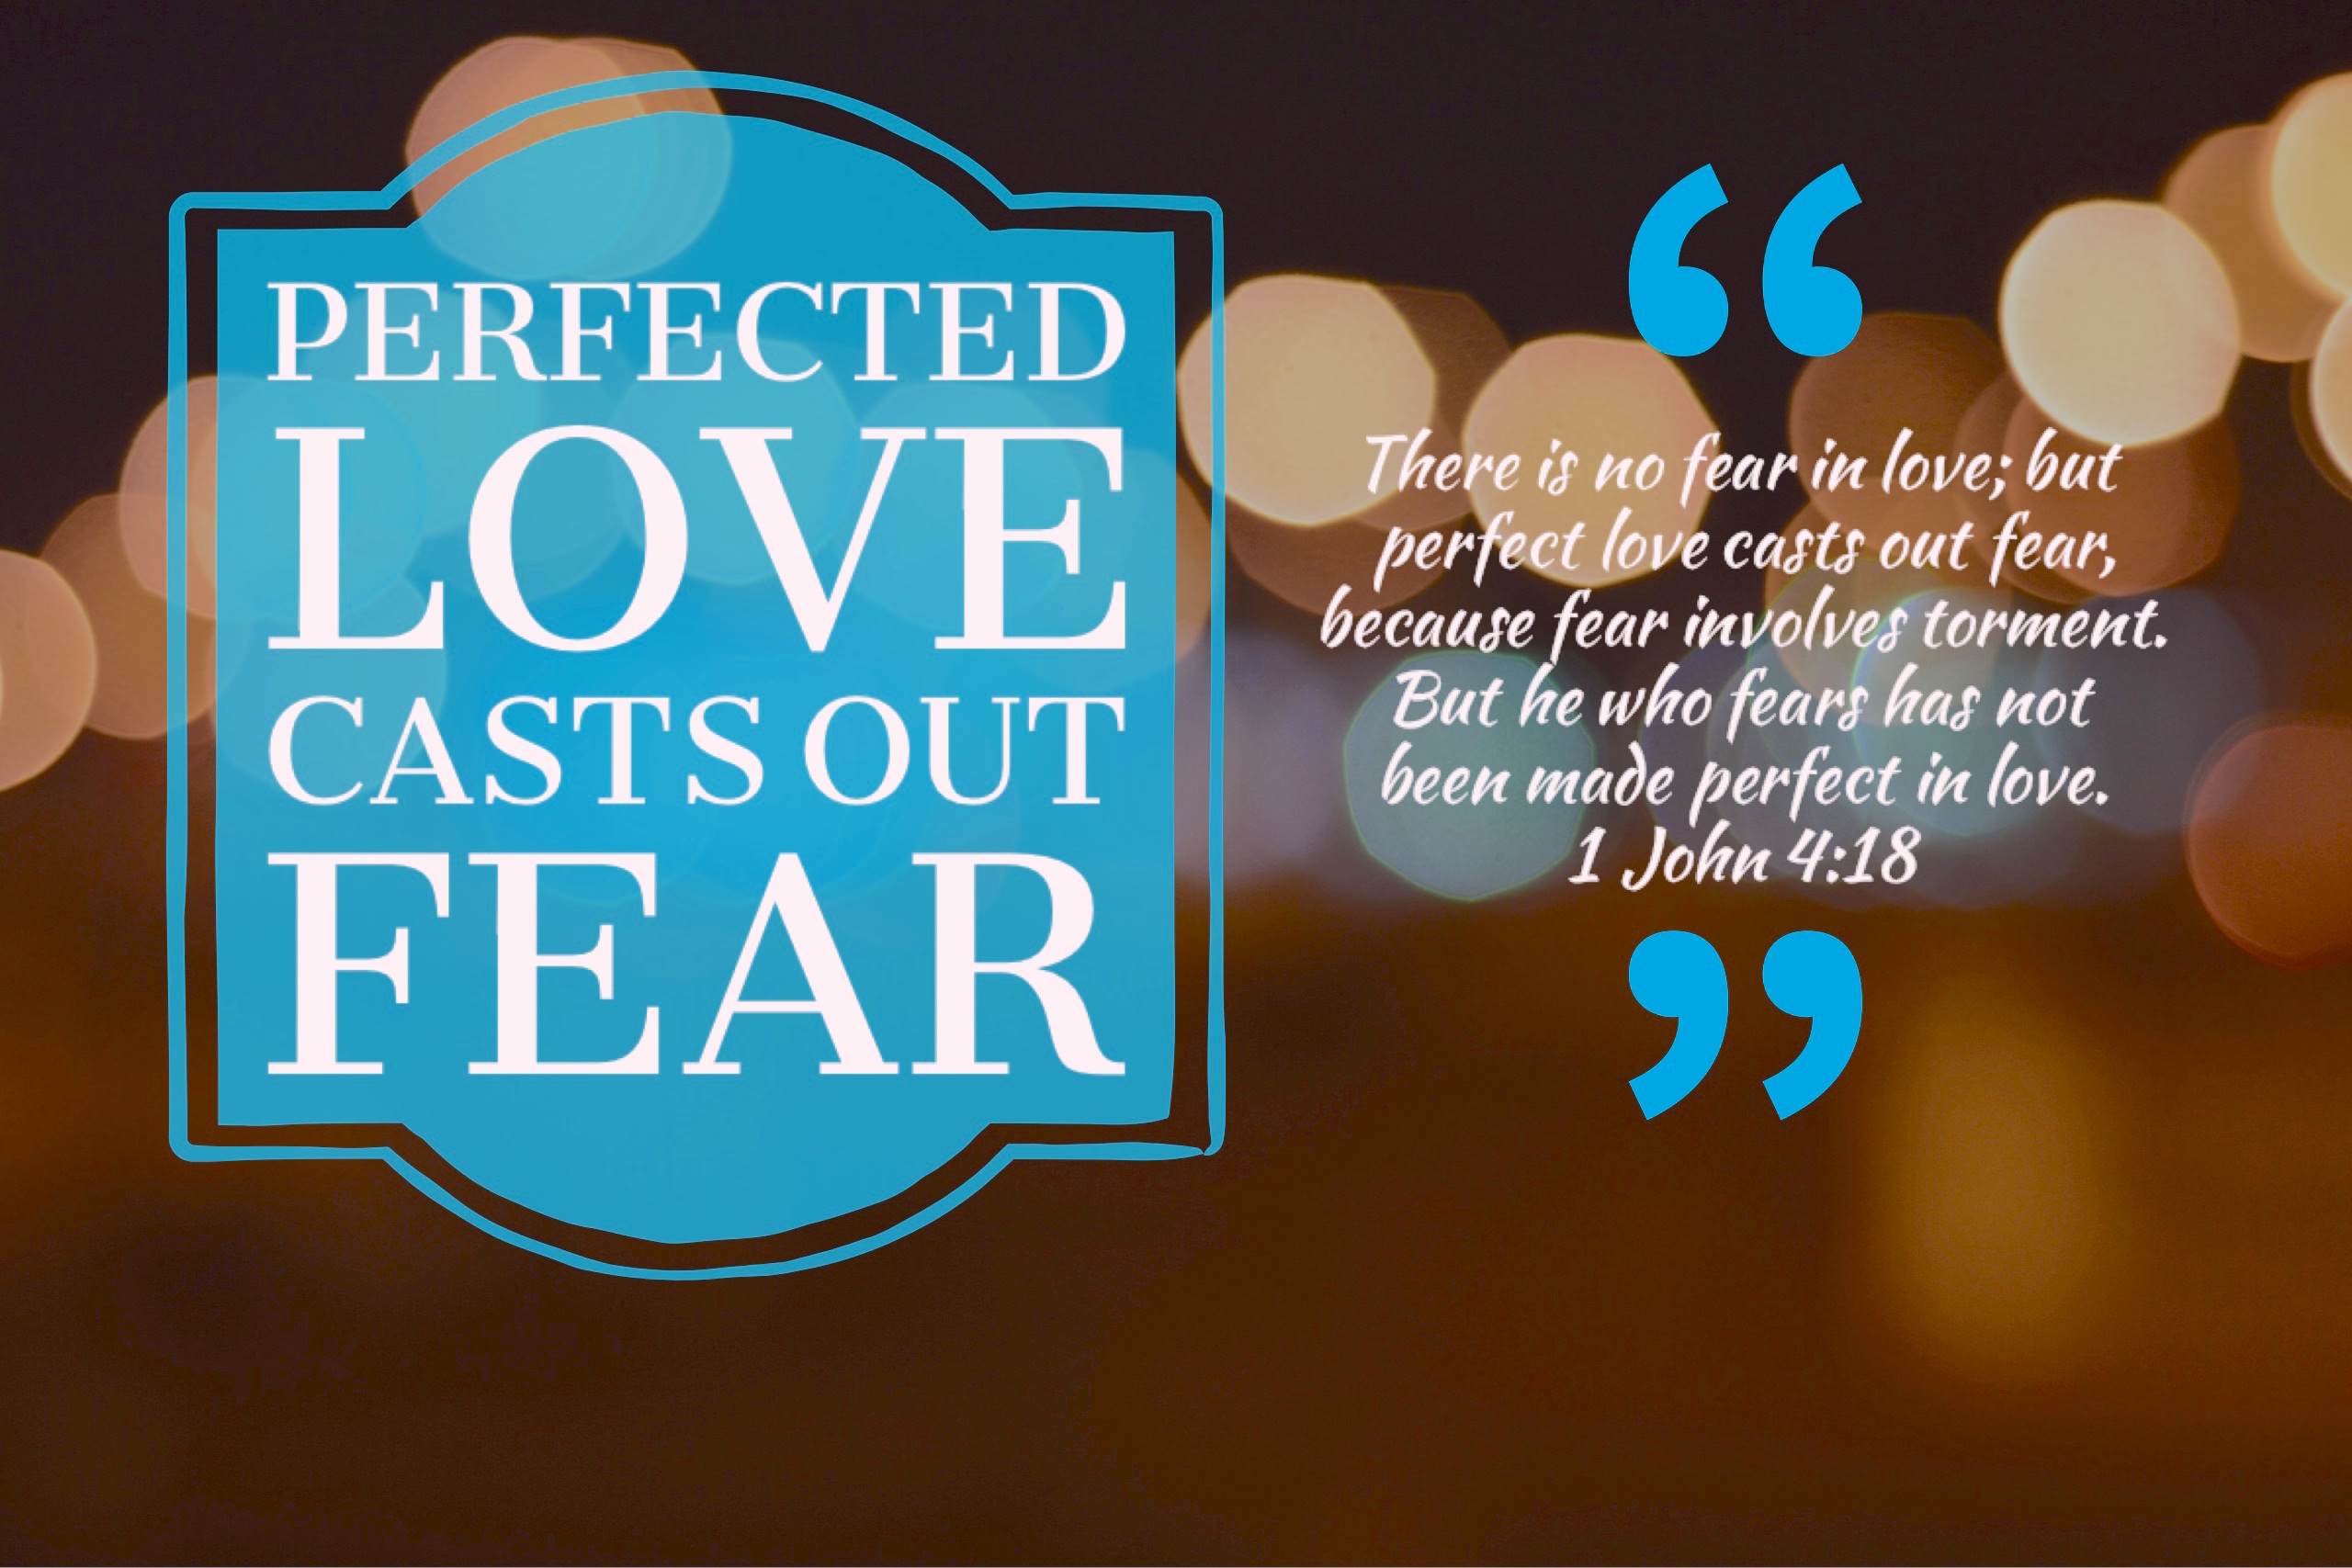 Perfected Love Casts Out Fear